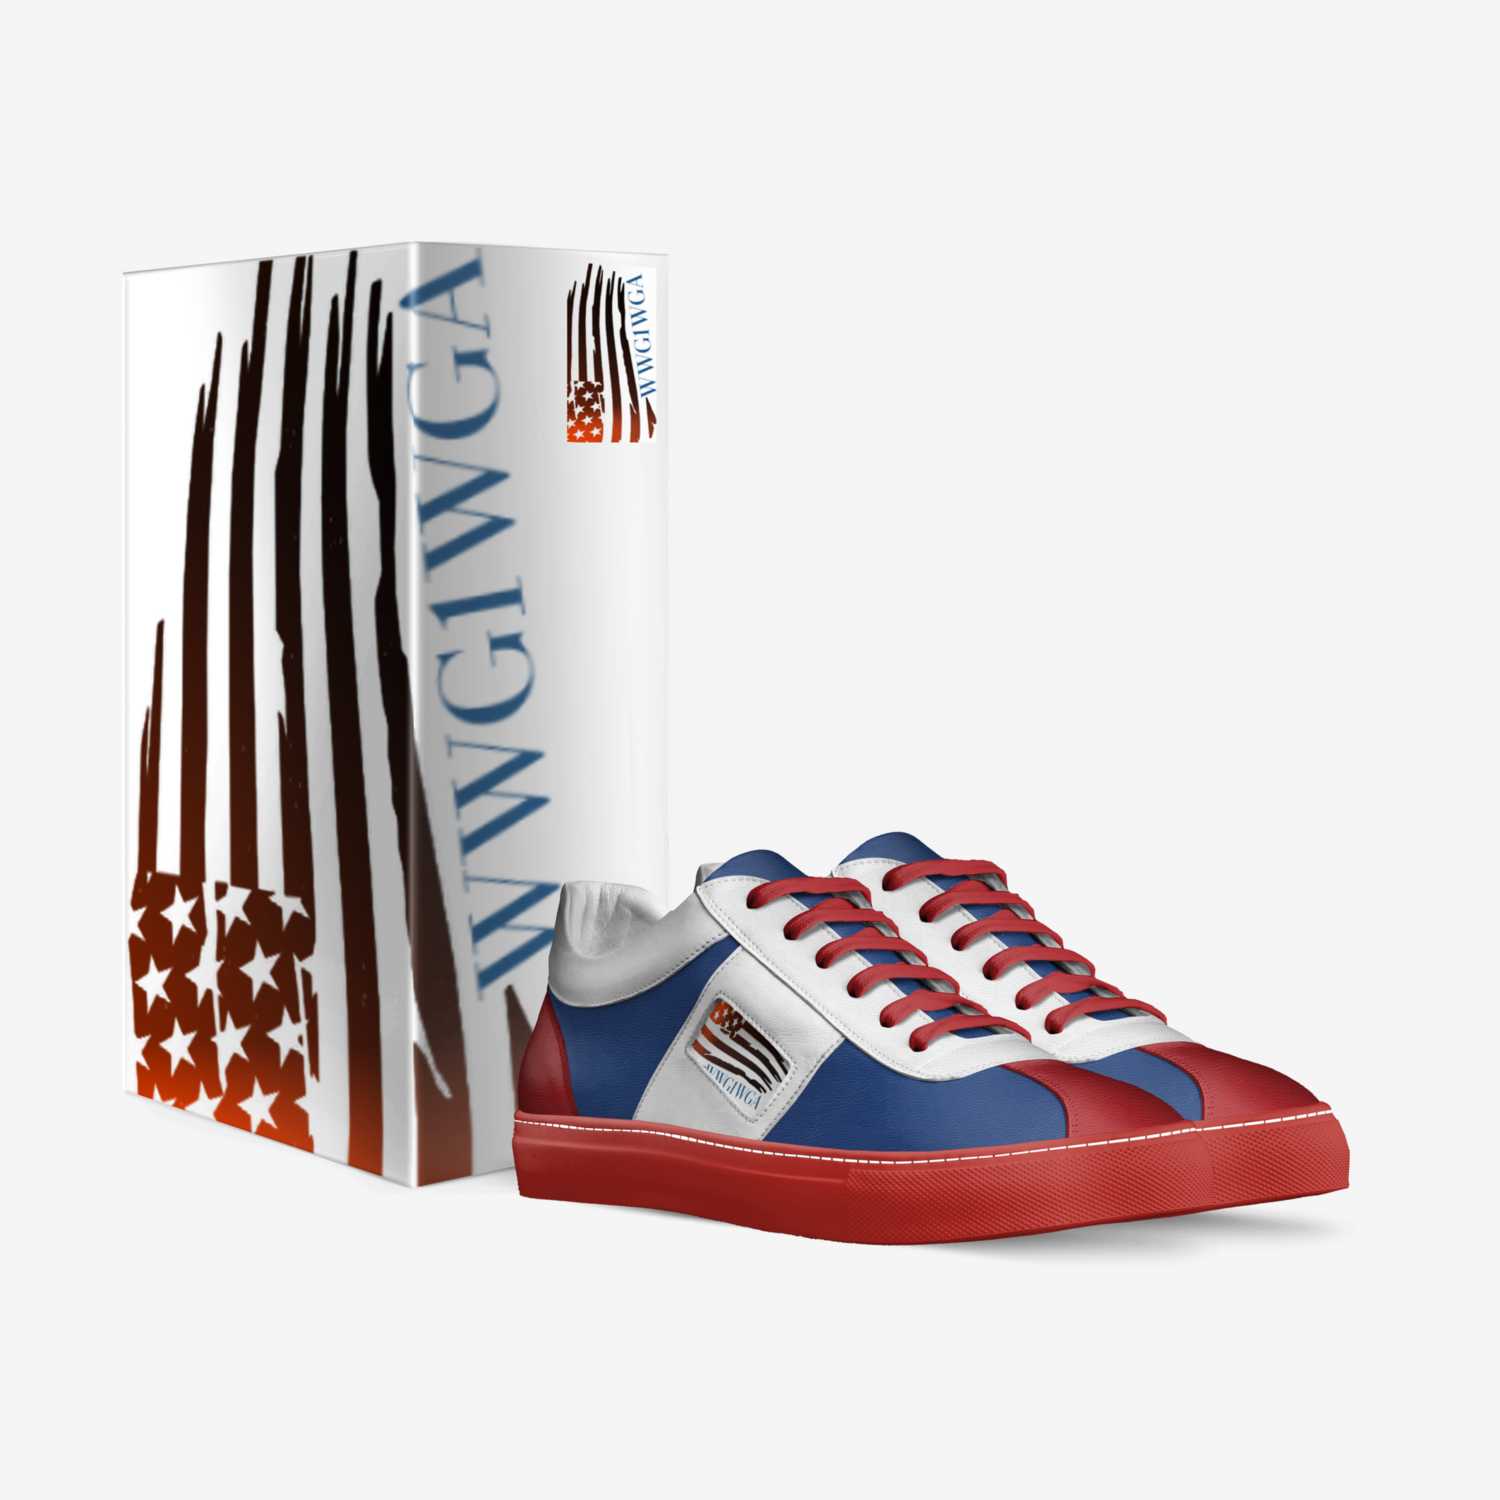 WWG1WGA custom made in Italy shoes by Charles Irvin | Box view